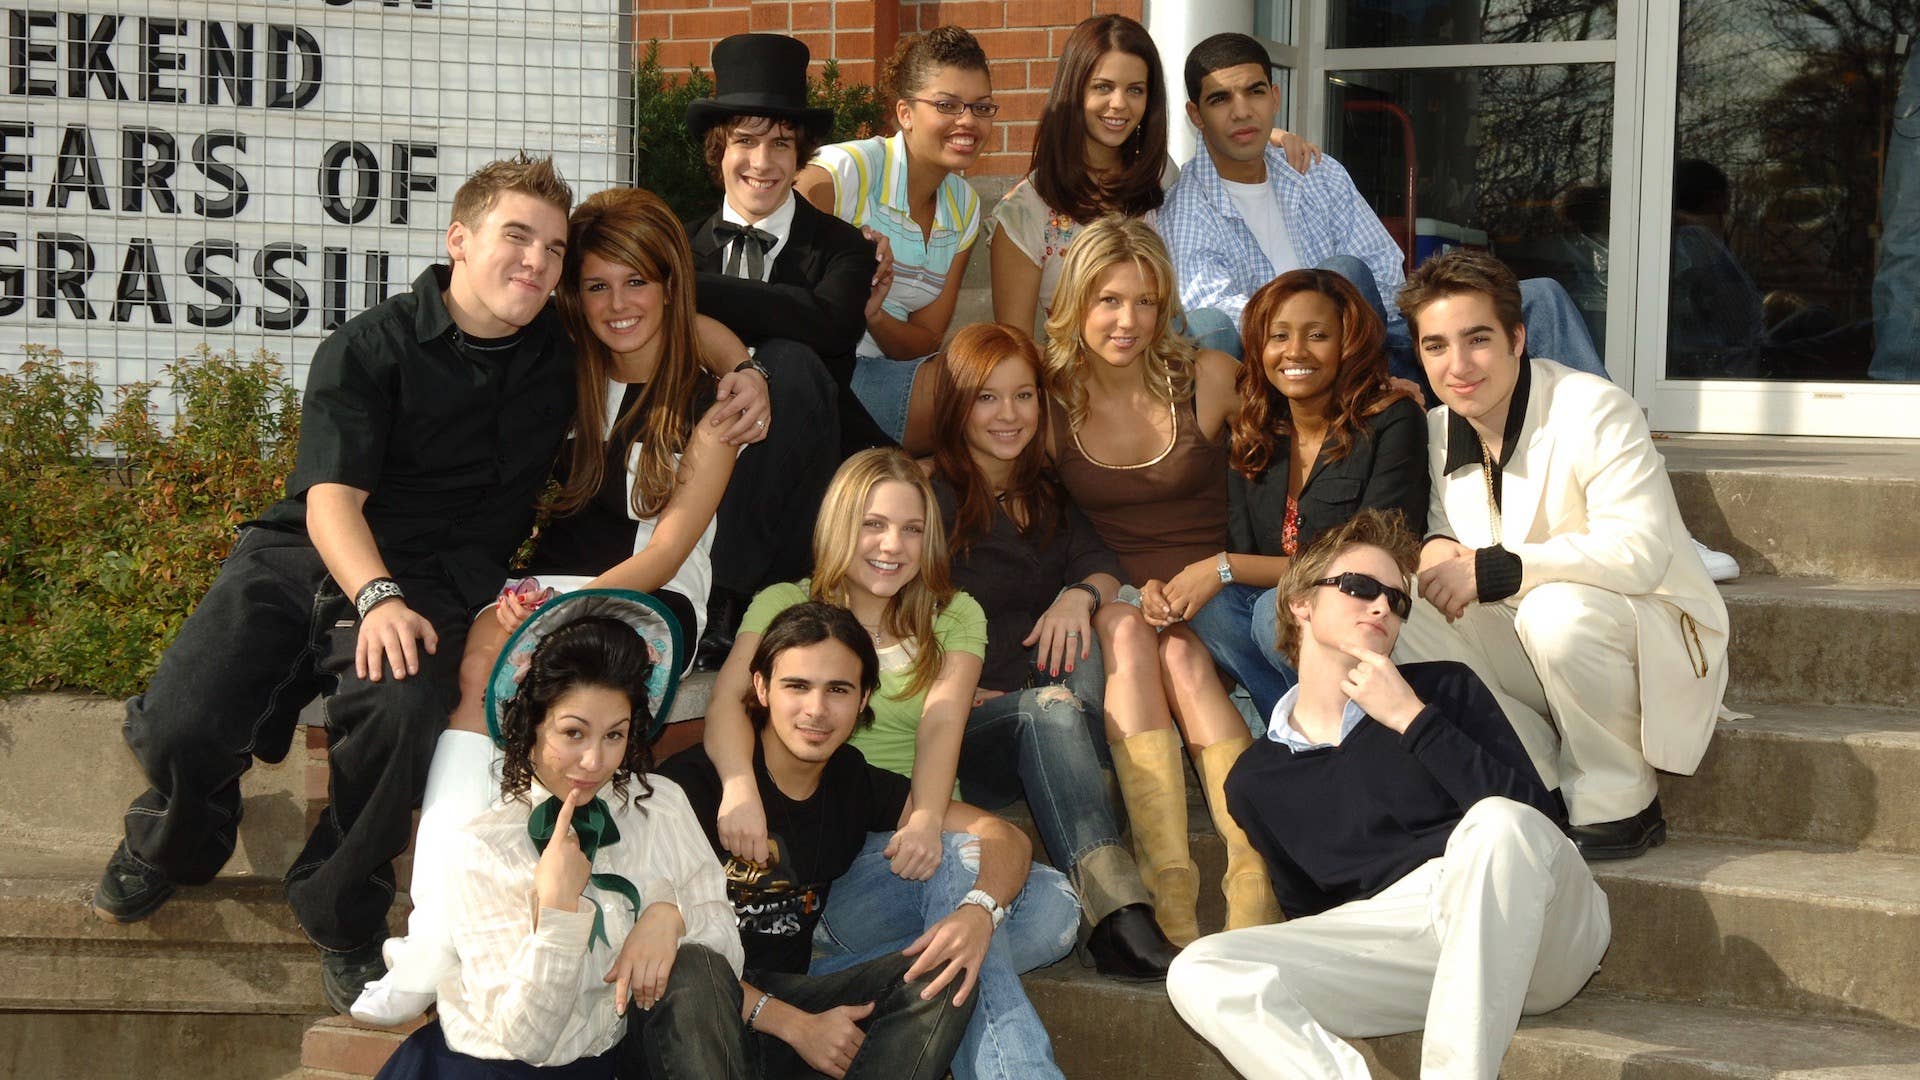 Cast of Degrassi: Next Generation celebrate their 100th Episode